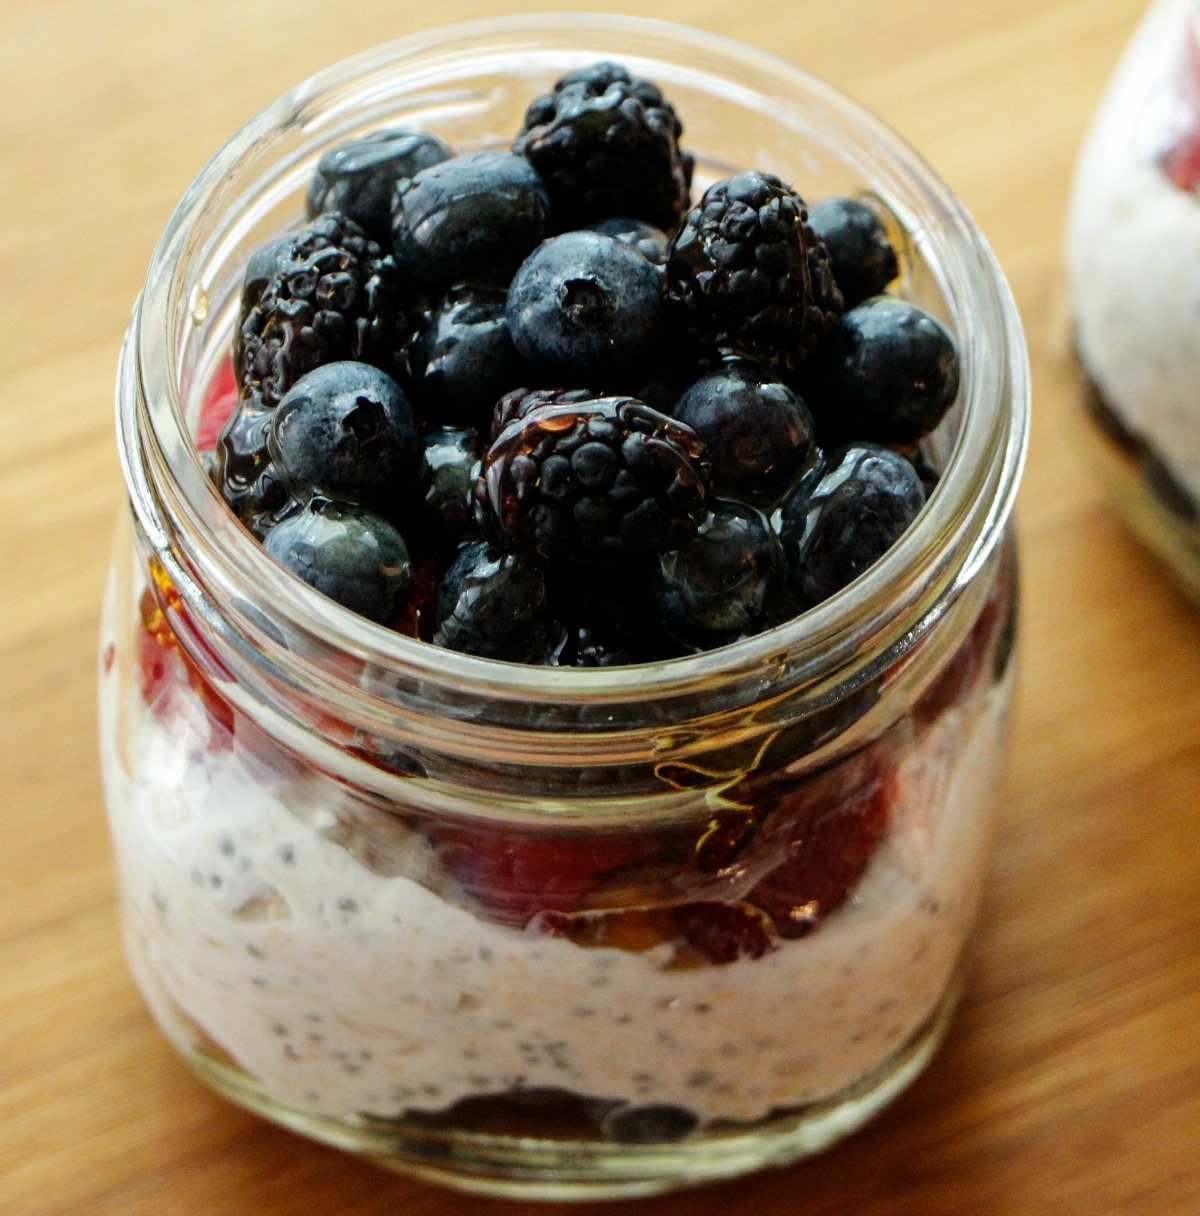 Tasty Overnight Oatmeal Recipes for Busy Mornings